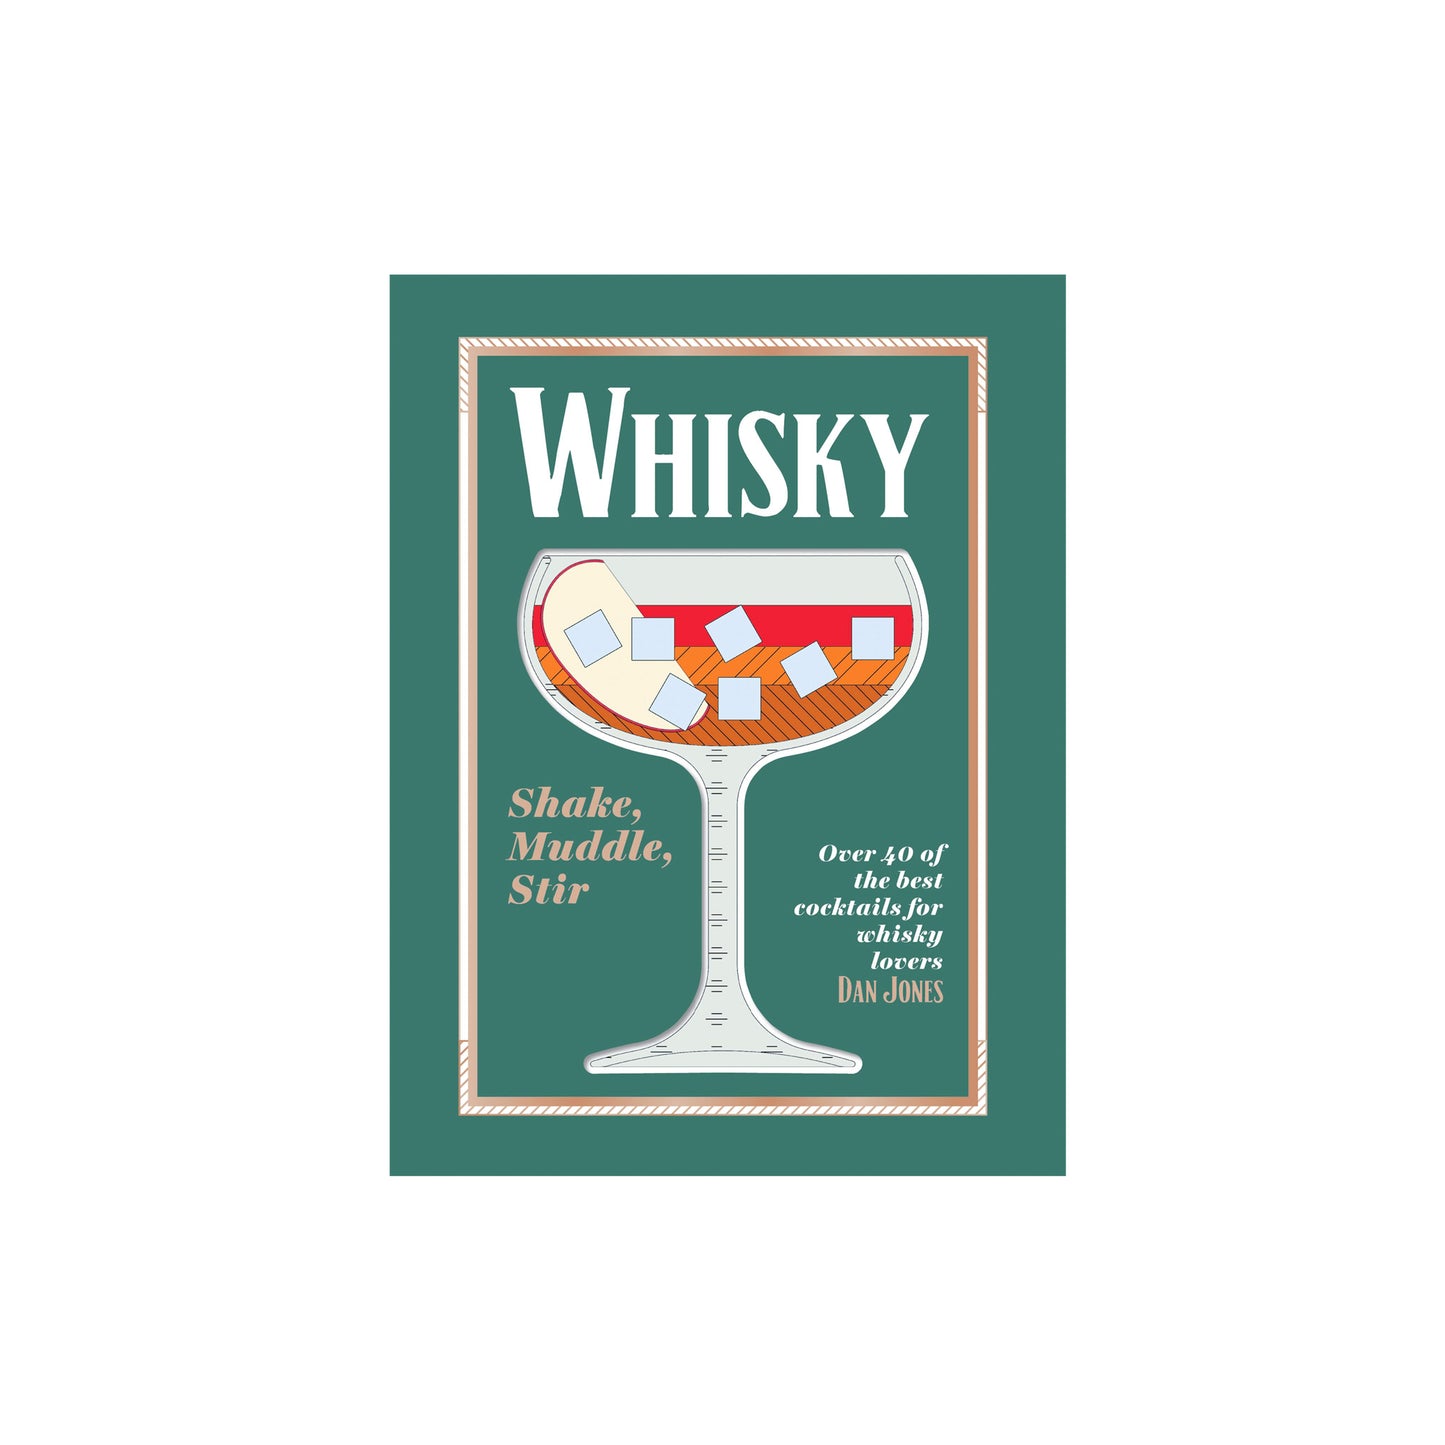 Whisky: Shake, Muddle, Stir - Over 40 of the Best Cocktails for Whisky Lovers